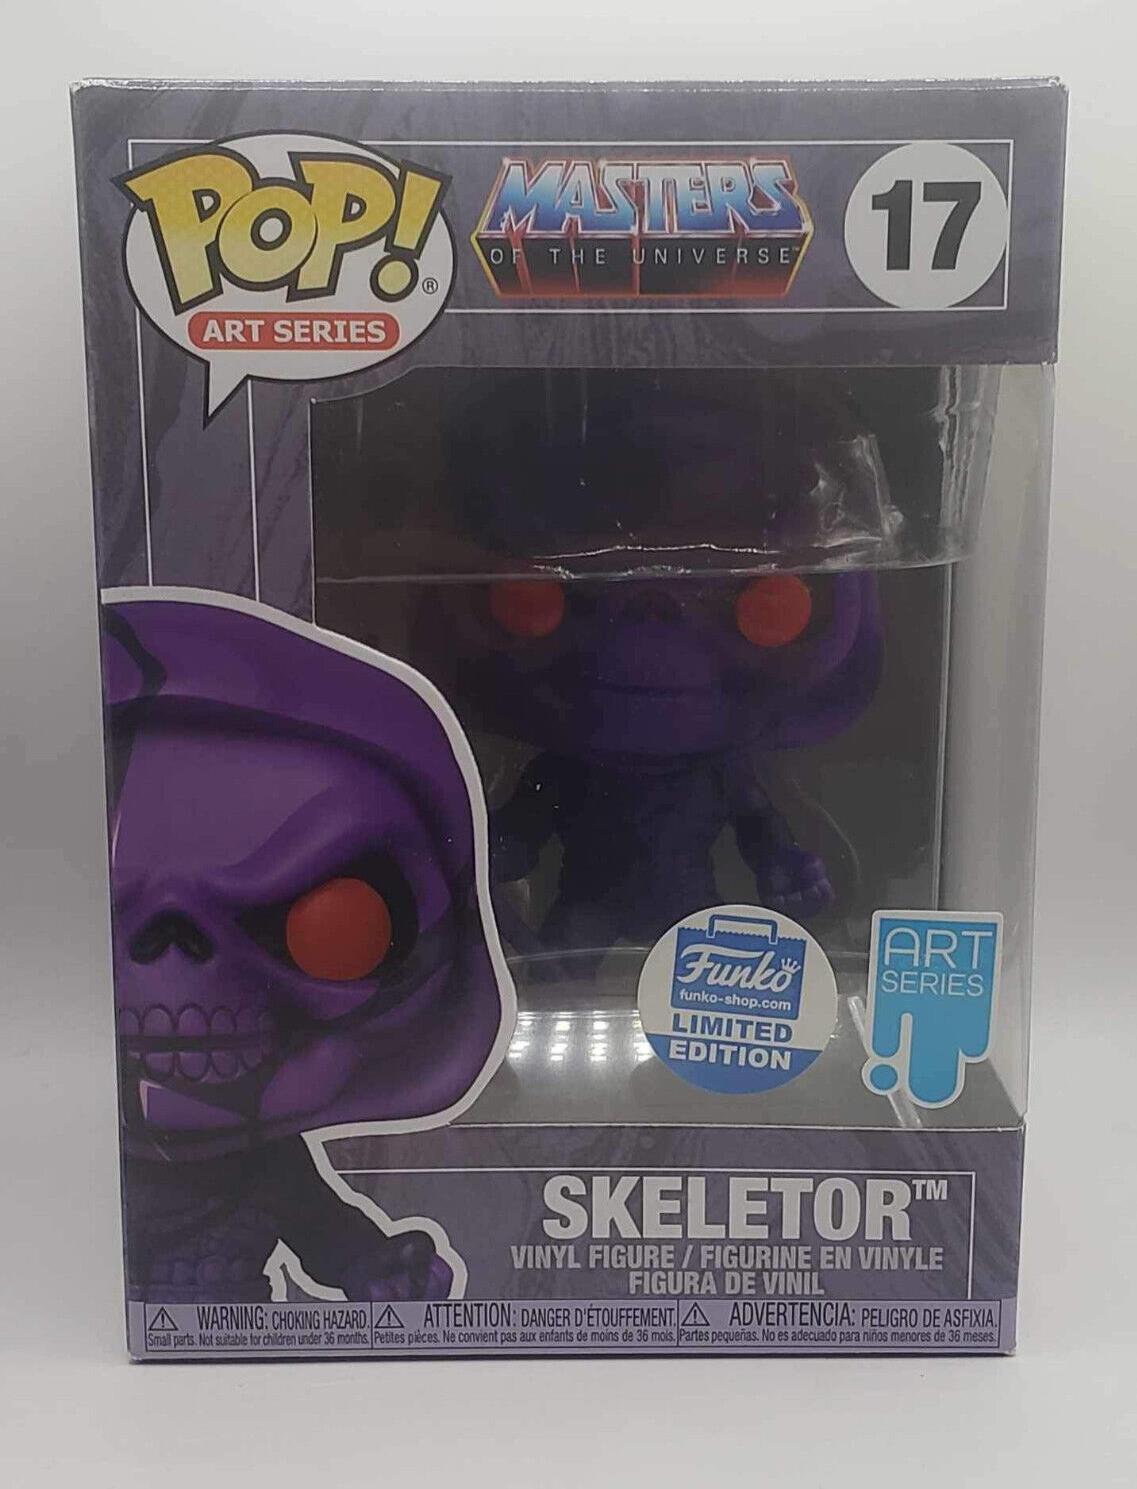 Skeletor #17 - Masters of the Universe Pop! Art Series [Funko Limited Edition]